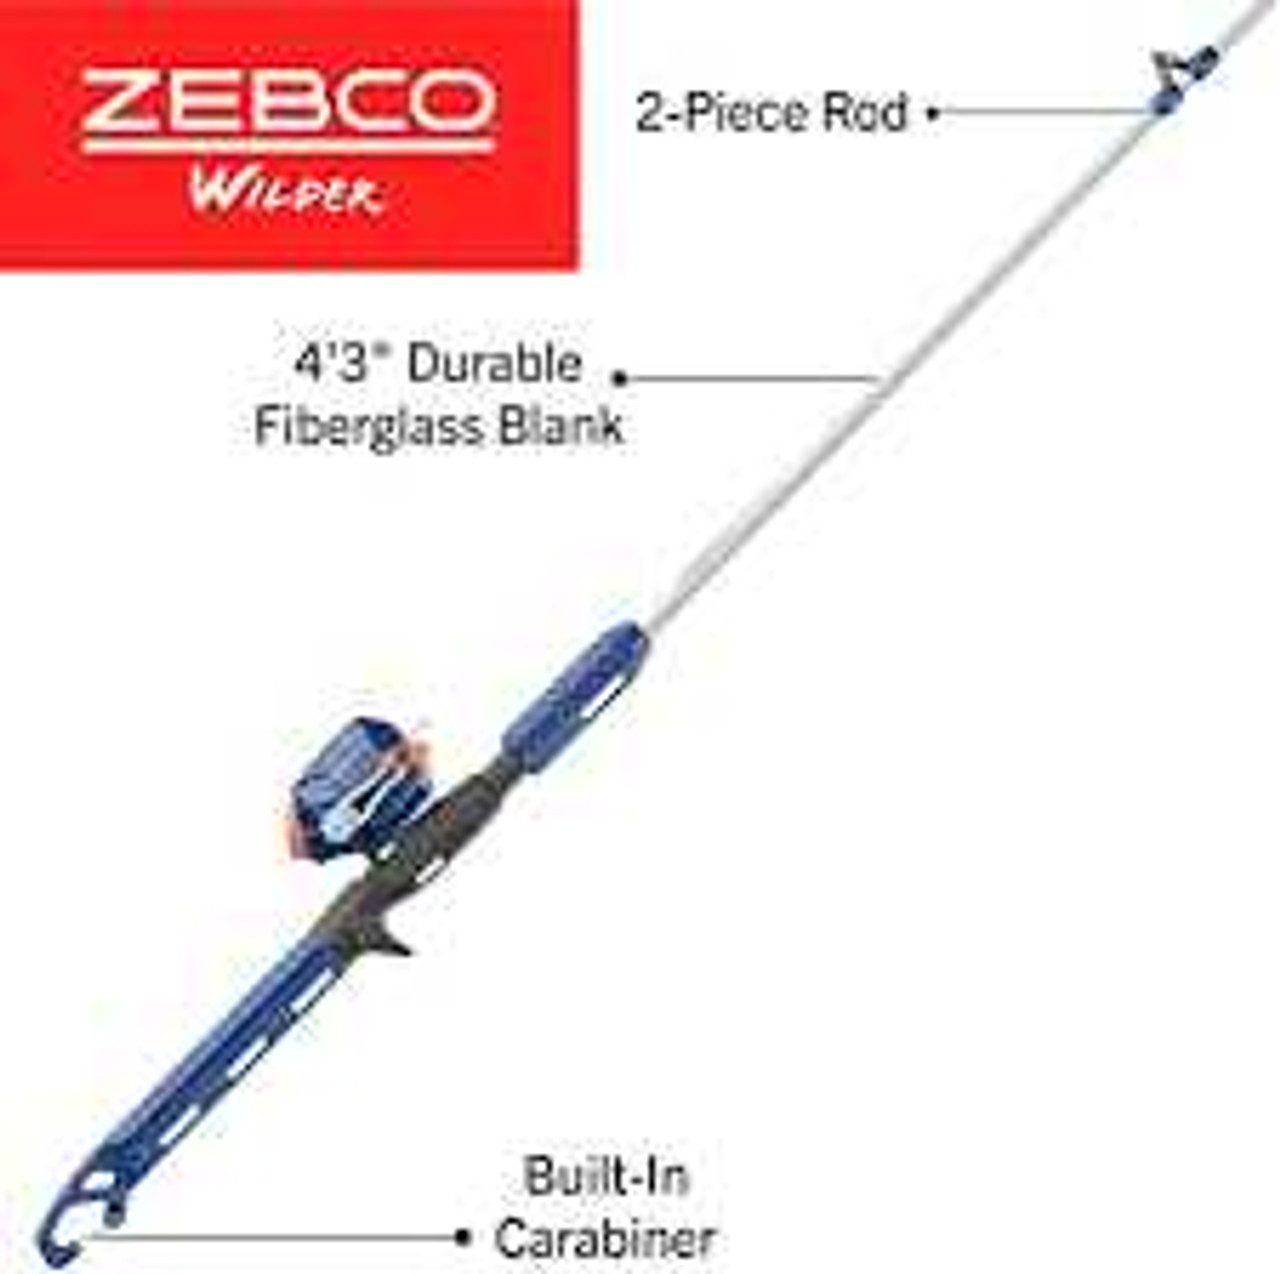 Zebco Spinning Combo Fishing Rod & Reel Combos 4.3: 1 Gear Ratio